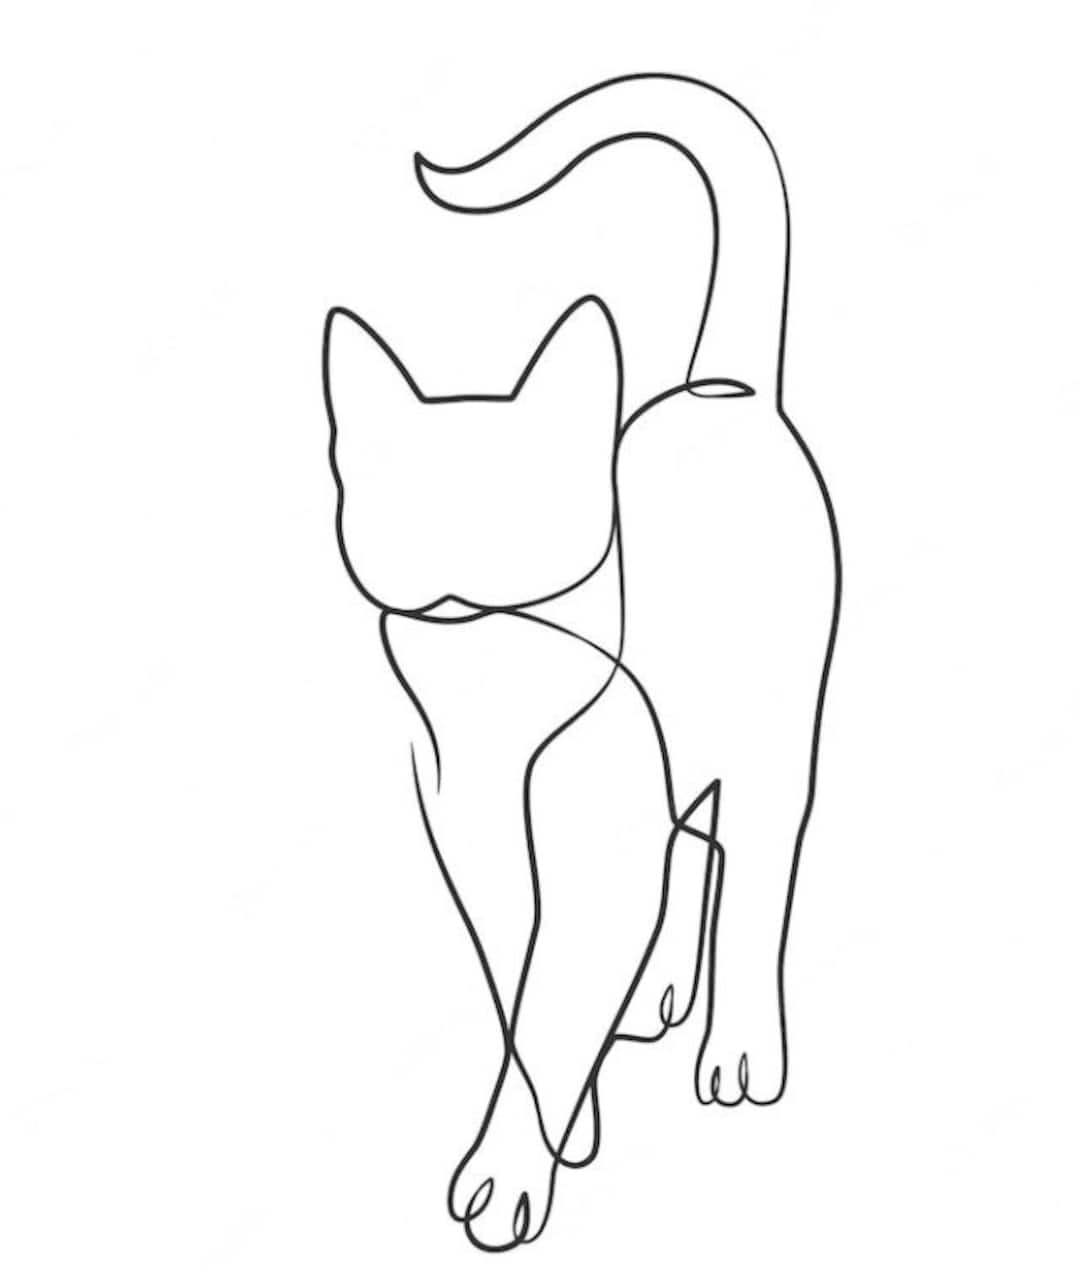 Continuous one line drawing of two cats in minimalism style. Cute